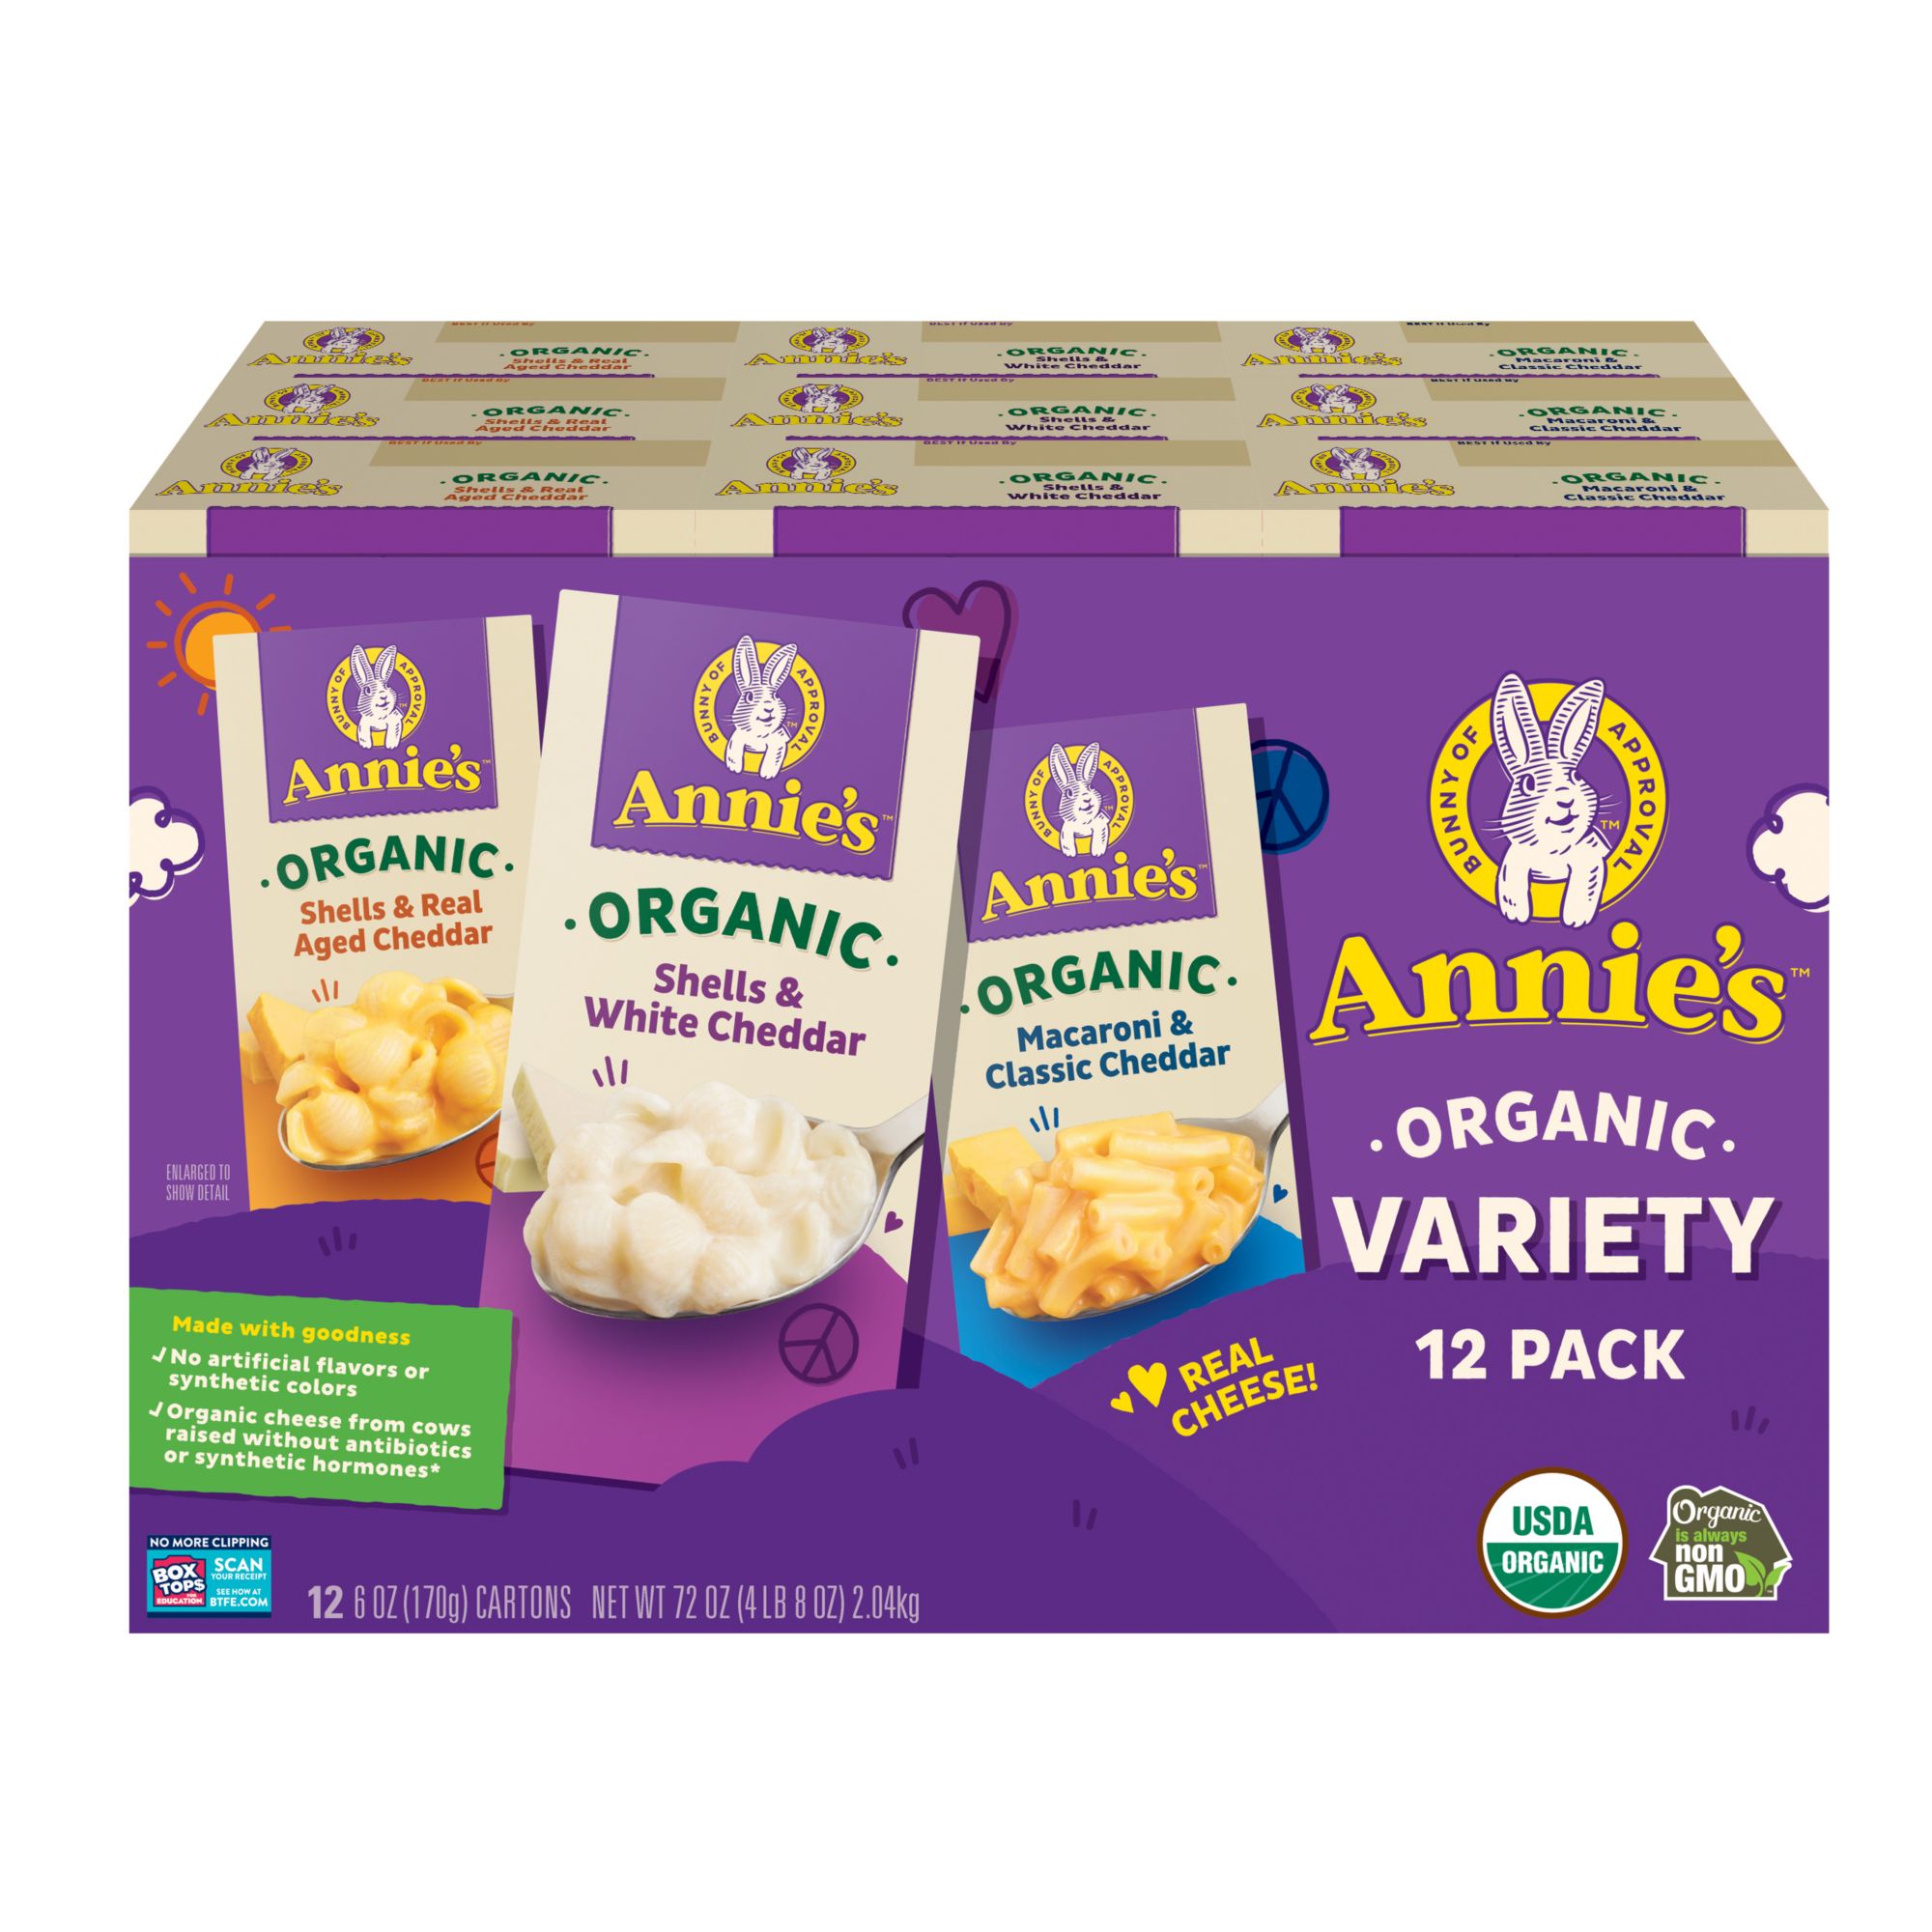 Annie's Organic Mac & Cheese, Variety Pack - 12 count, 6 oz boxes